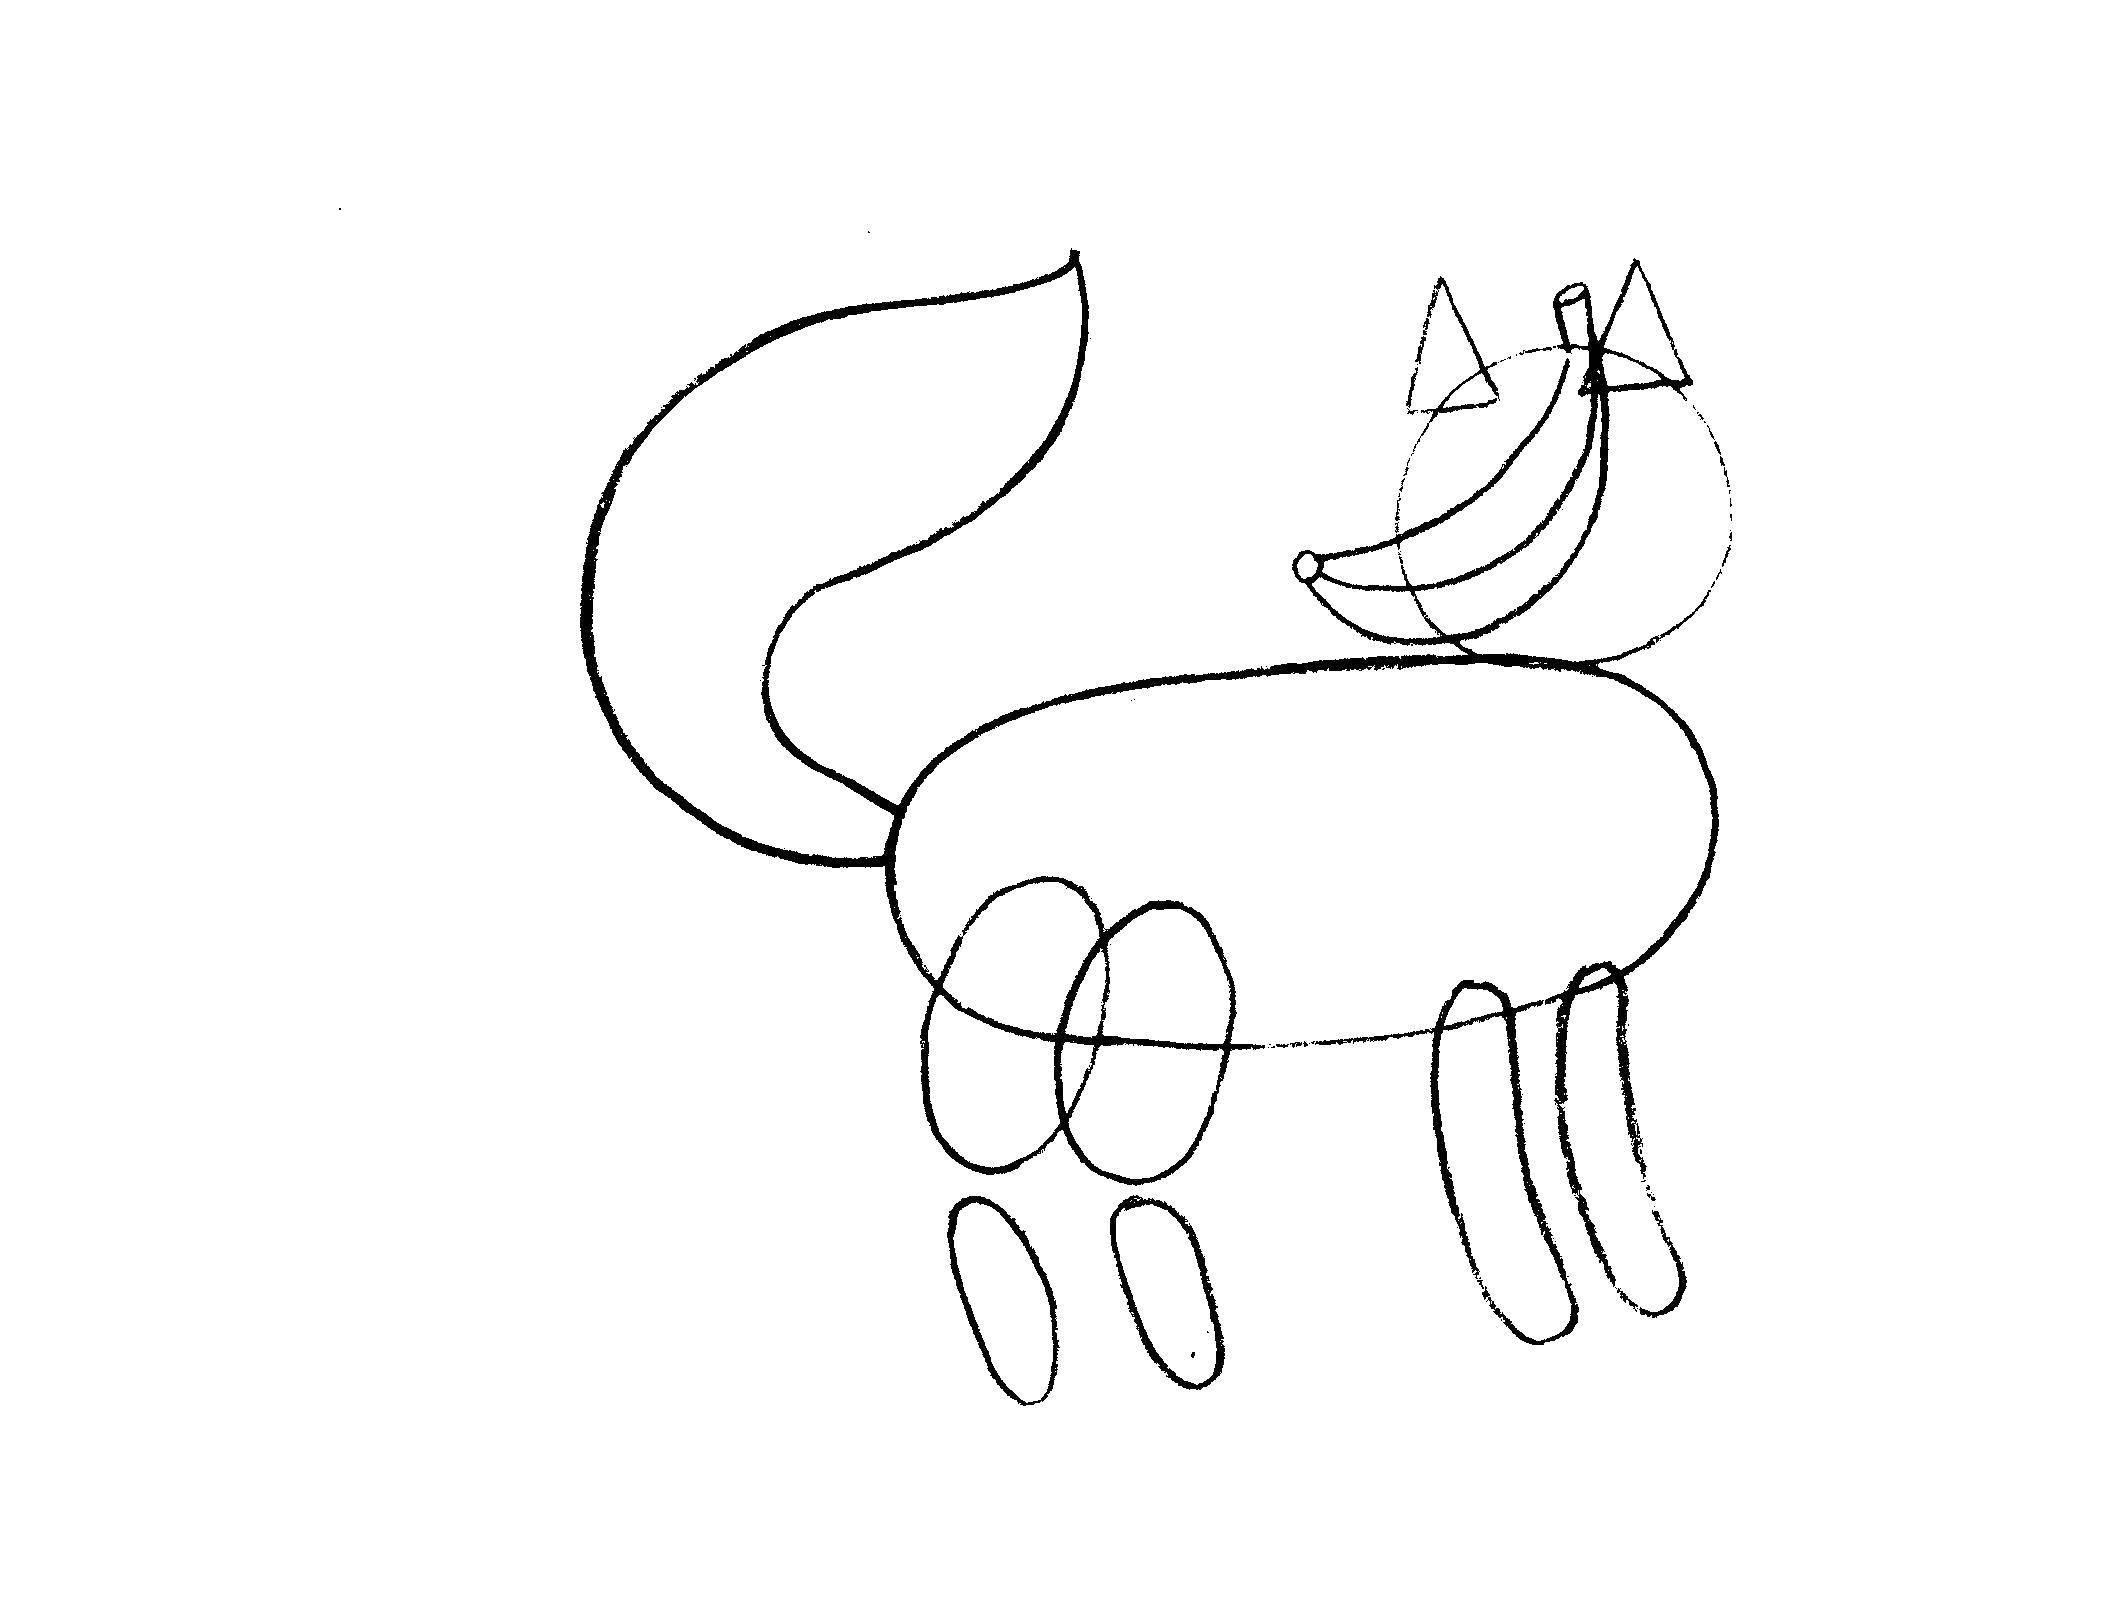 Coloring Draw a Fox. Category the Fox. Tags:  Fox, draw.